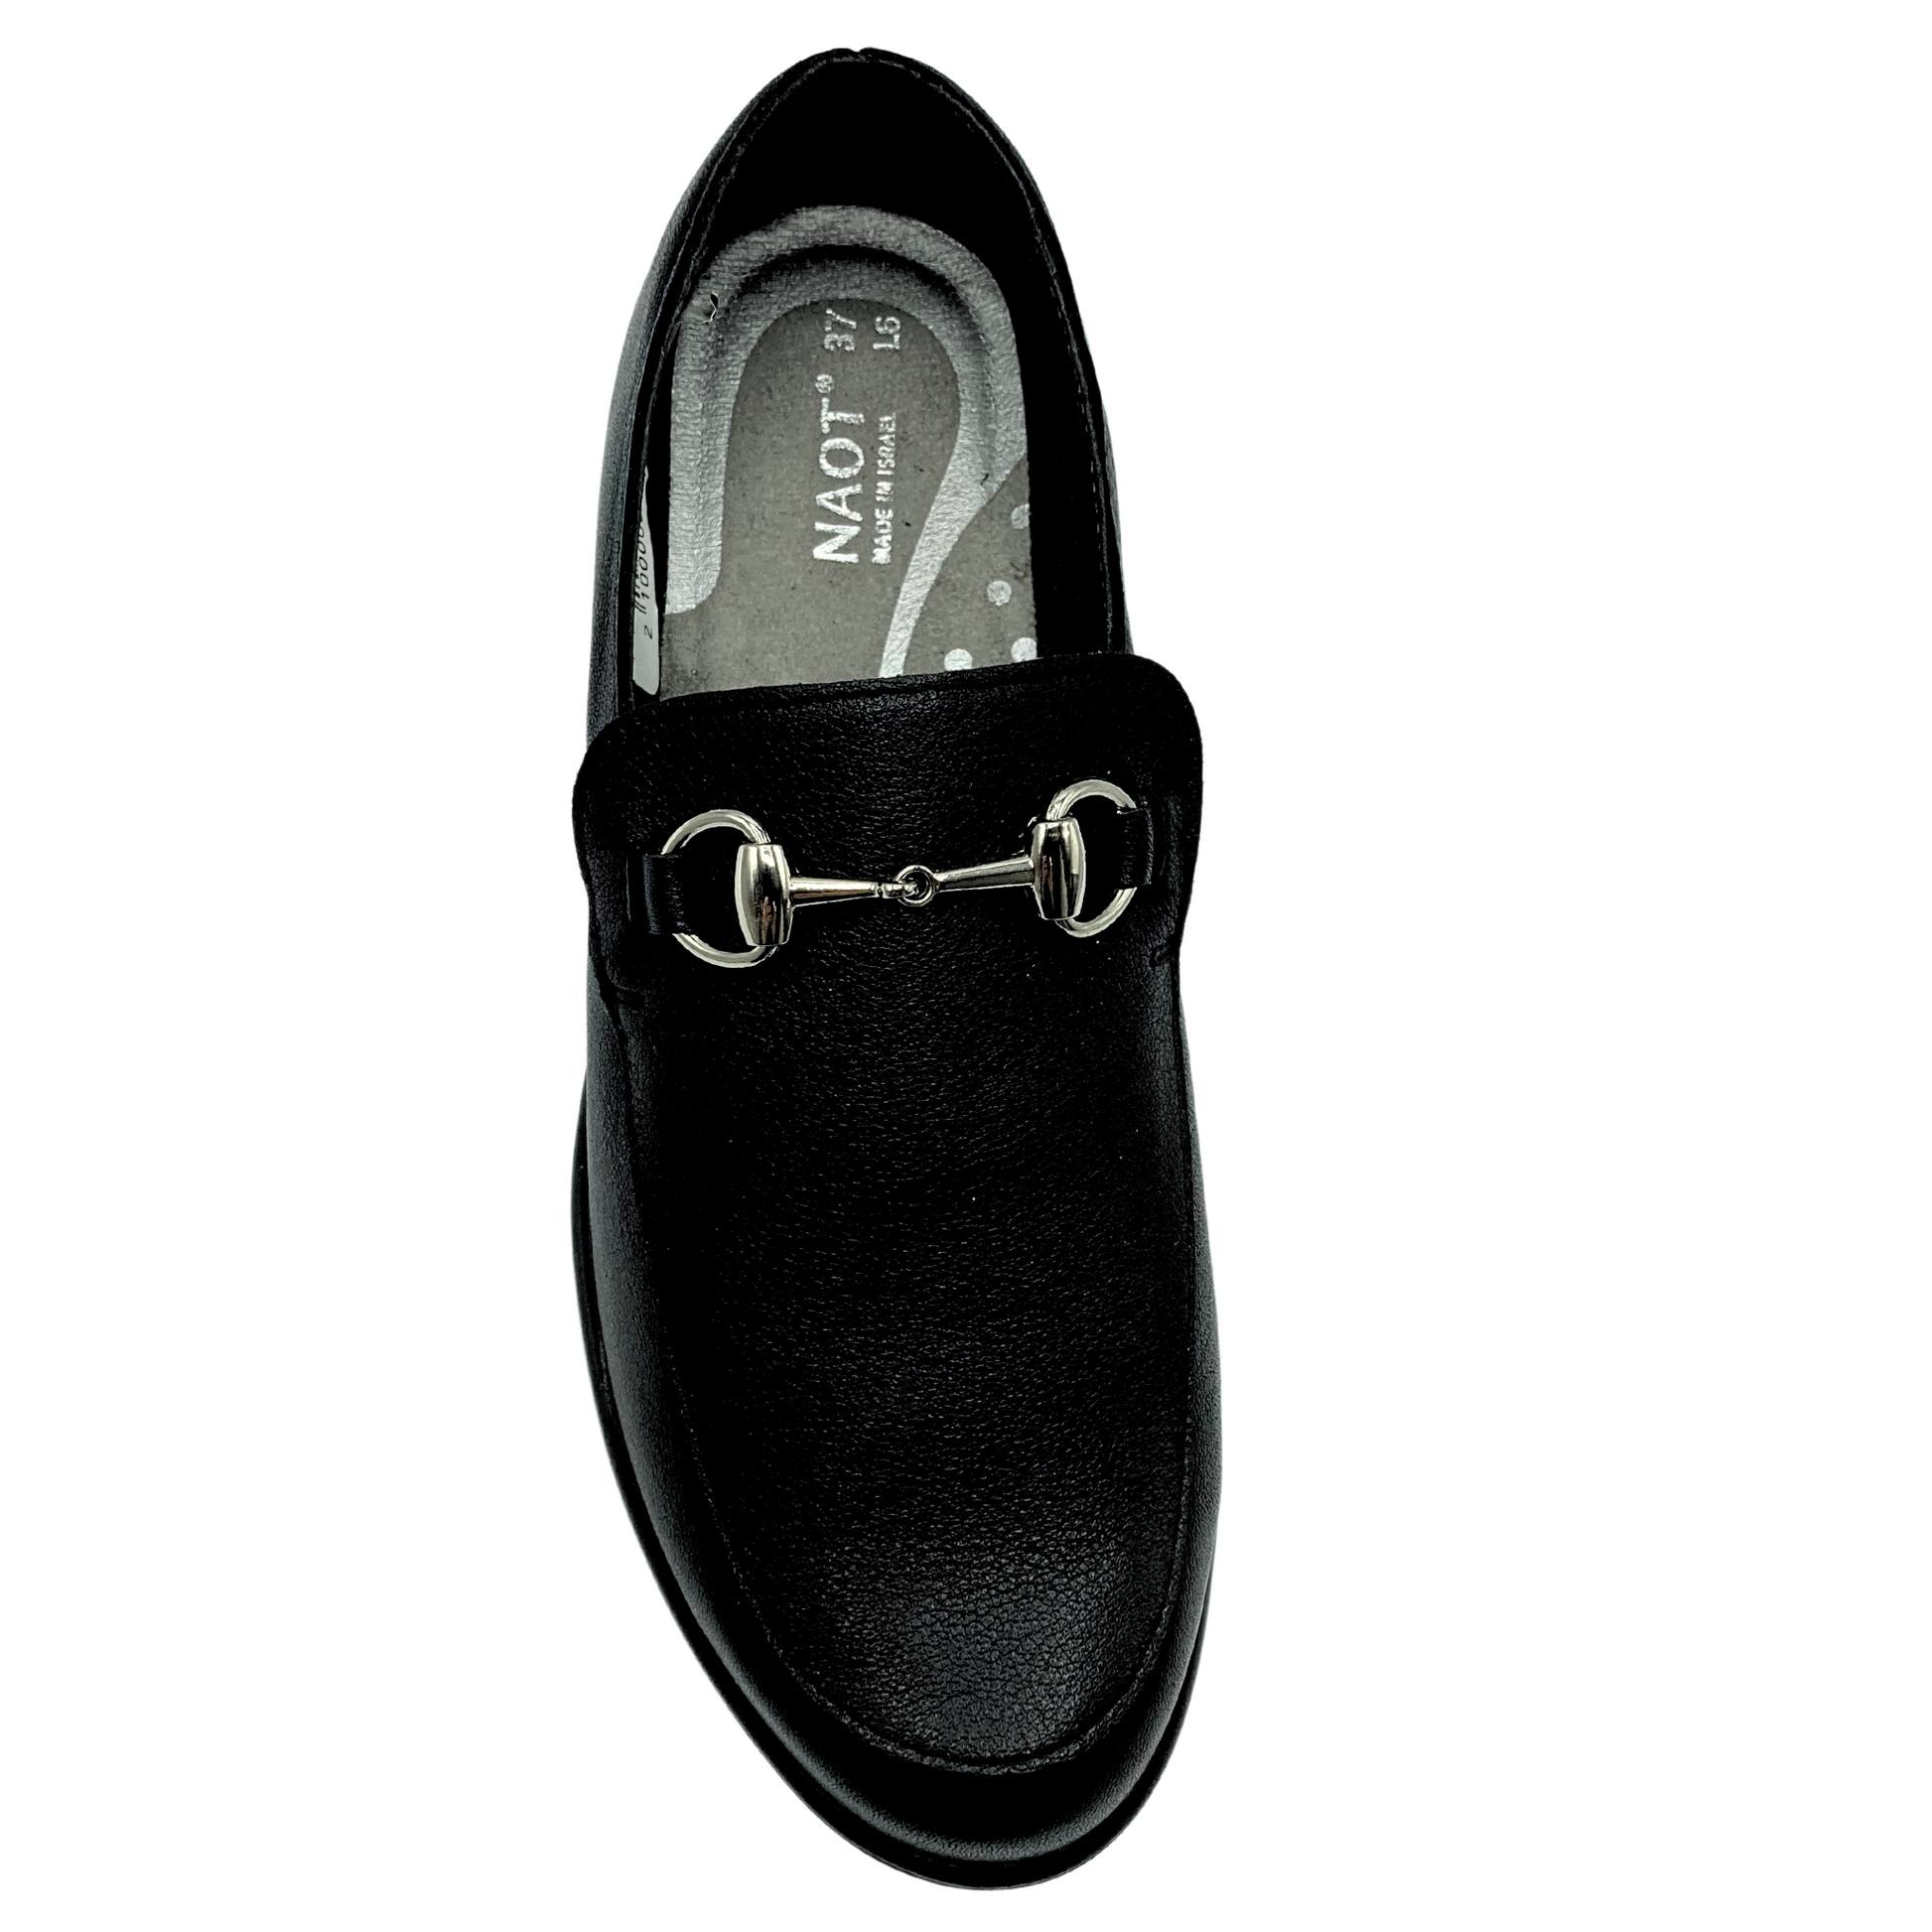 Top down view of leather loafer with gold metal detail 